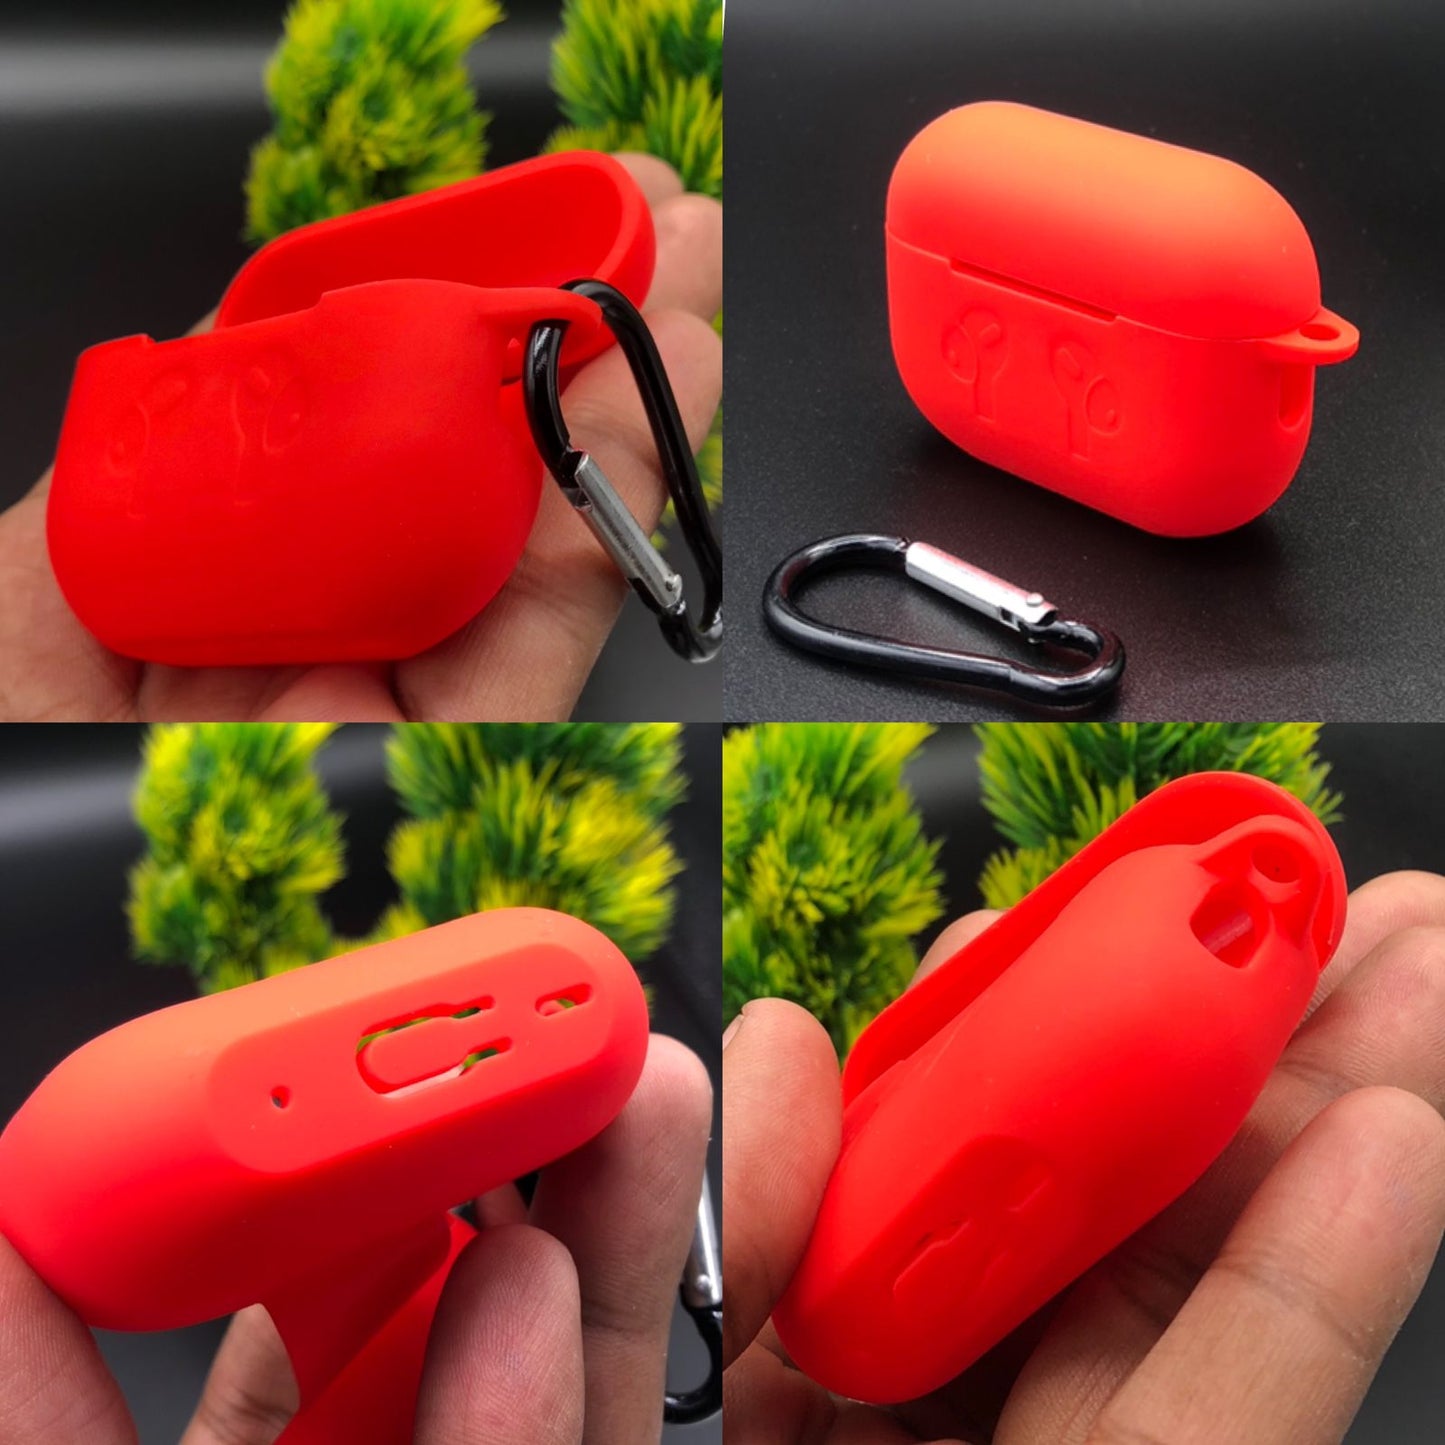 Airpods Pro 2 Silicon Case With Metal Hook